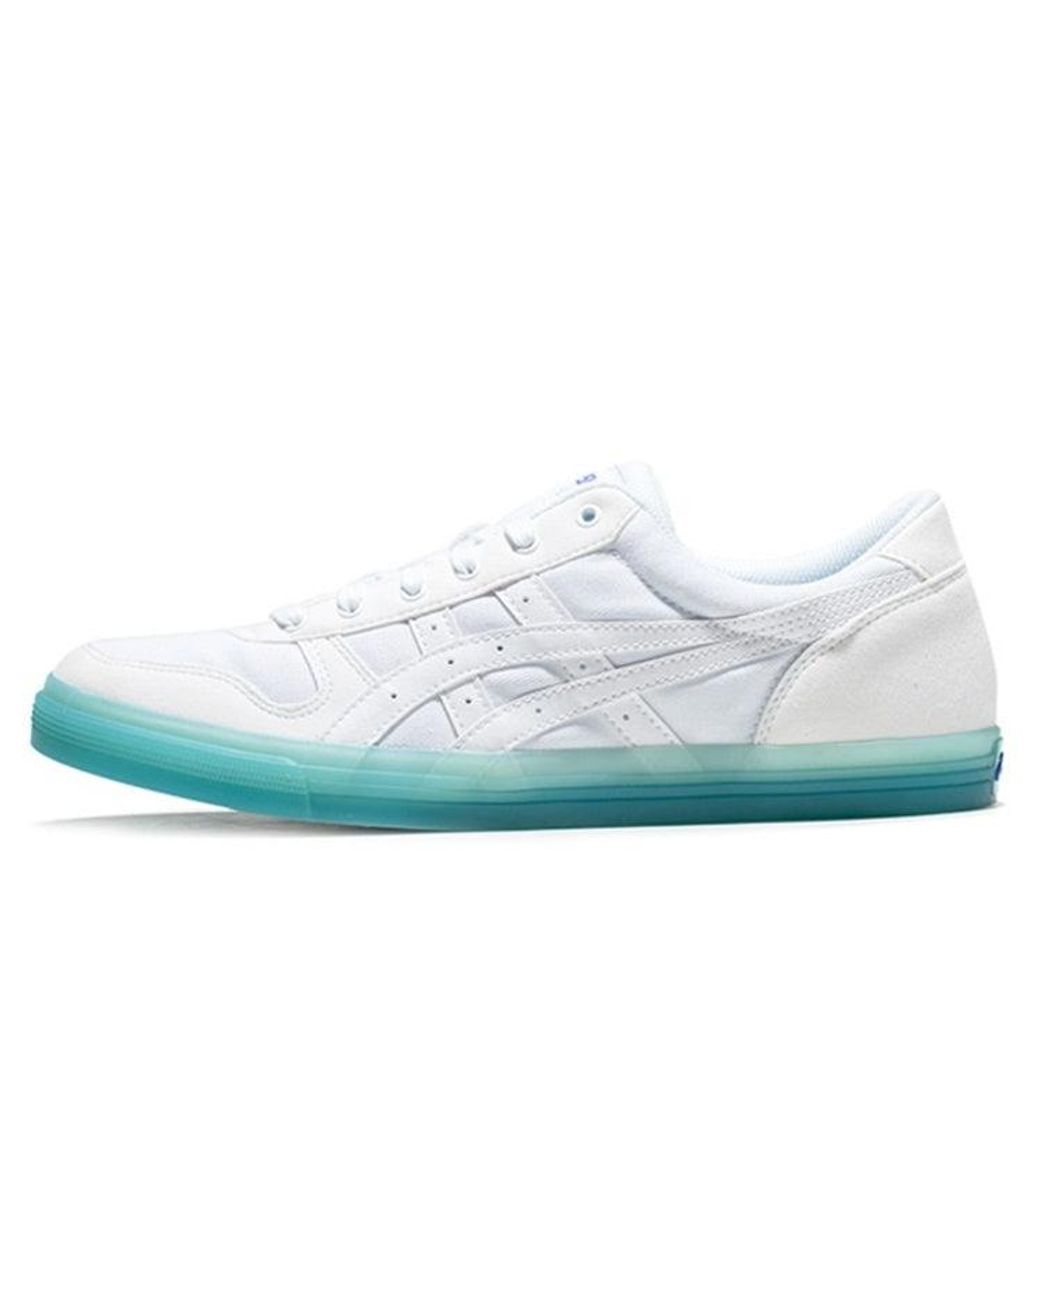 Asics Aaron Jelly Sole Retro Casual Shoes White Blue for Men | Lyst